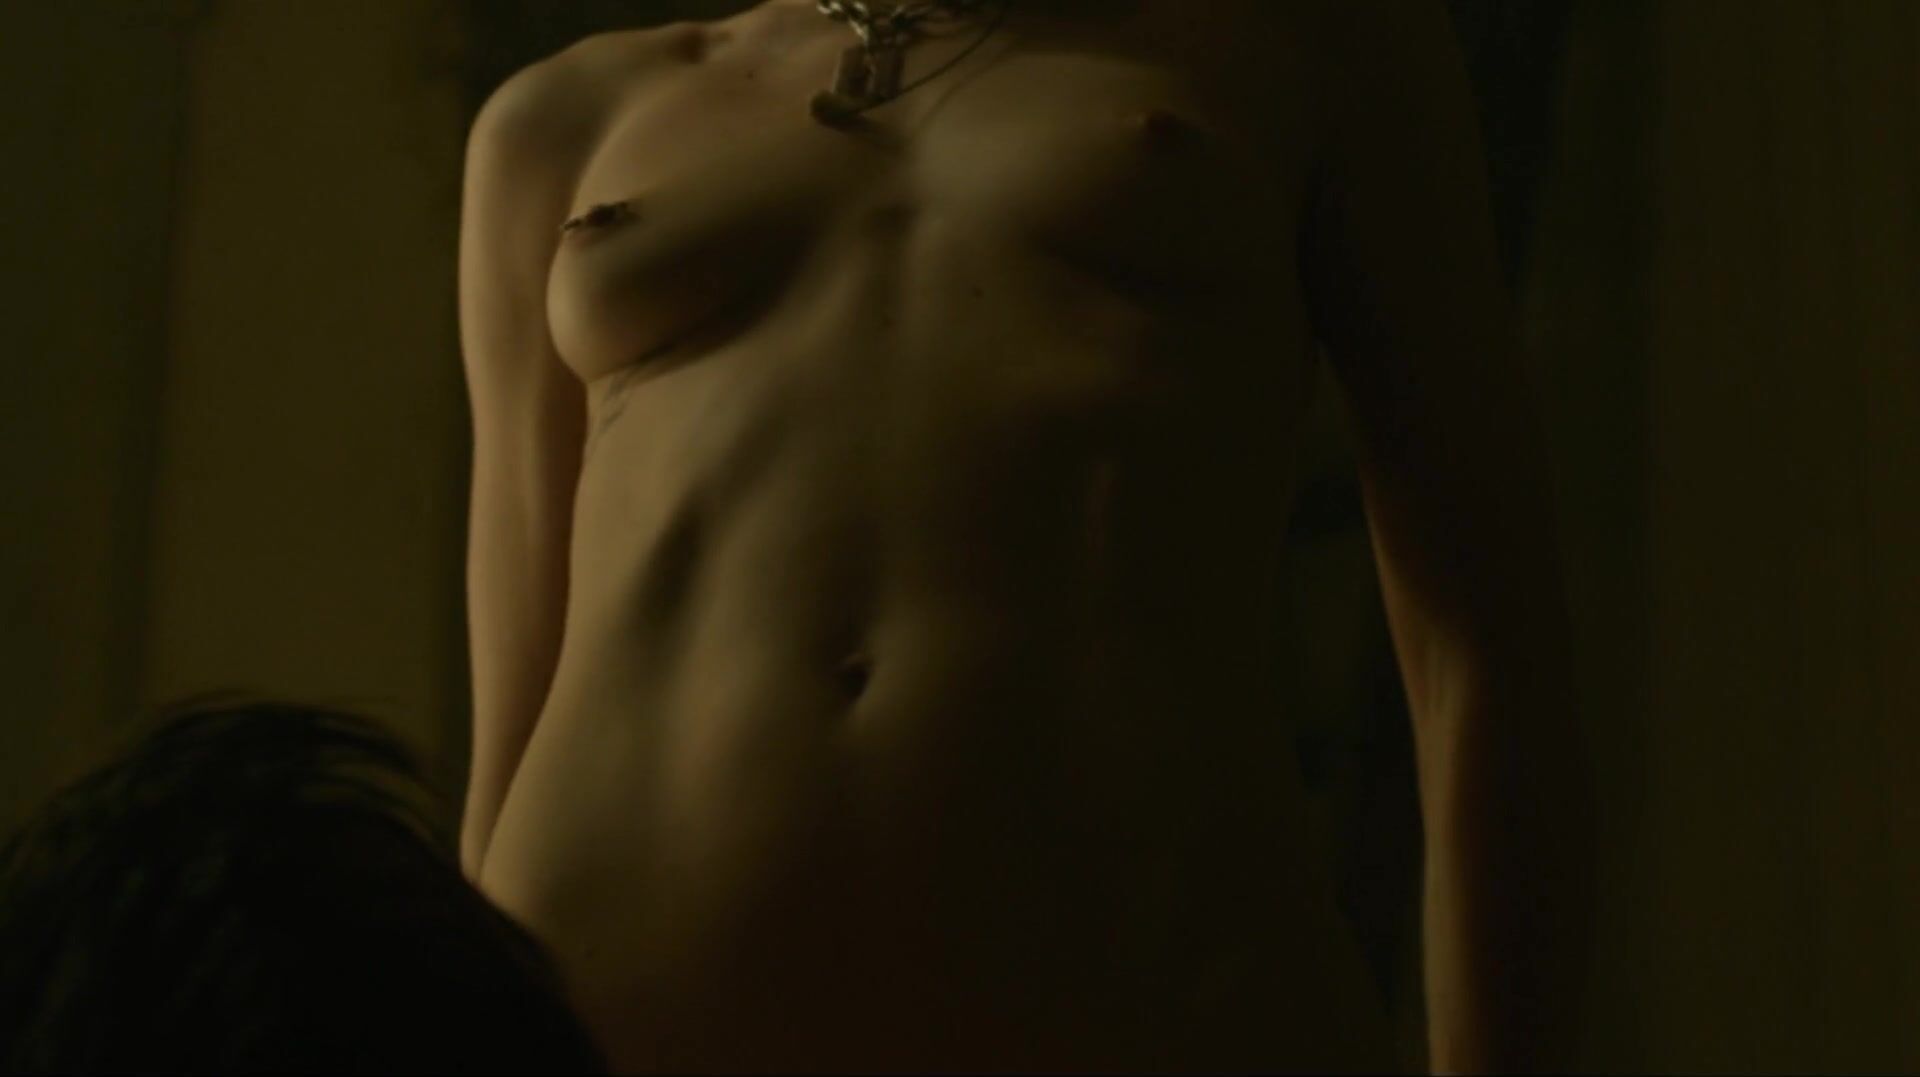 Heavy-R Men hump Rooney Mara with her consent or without it in Girl With The Dragon Tattoo Spa